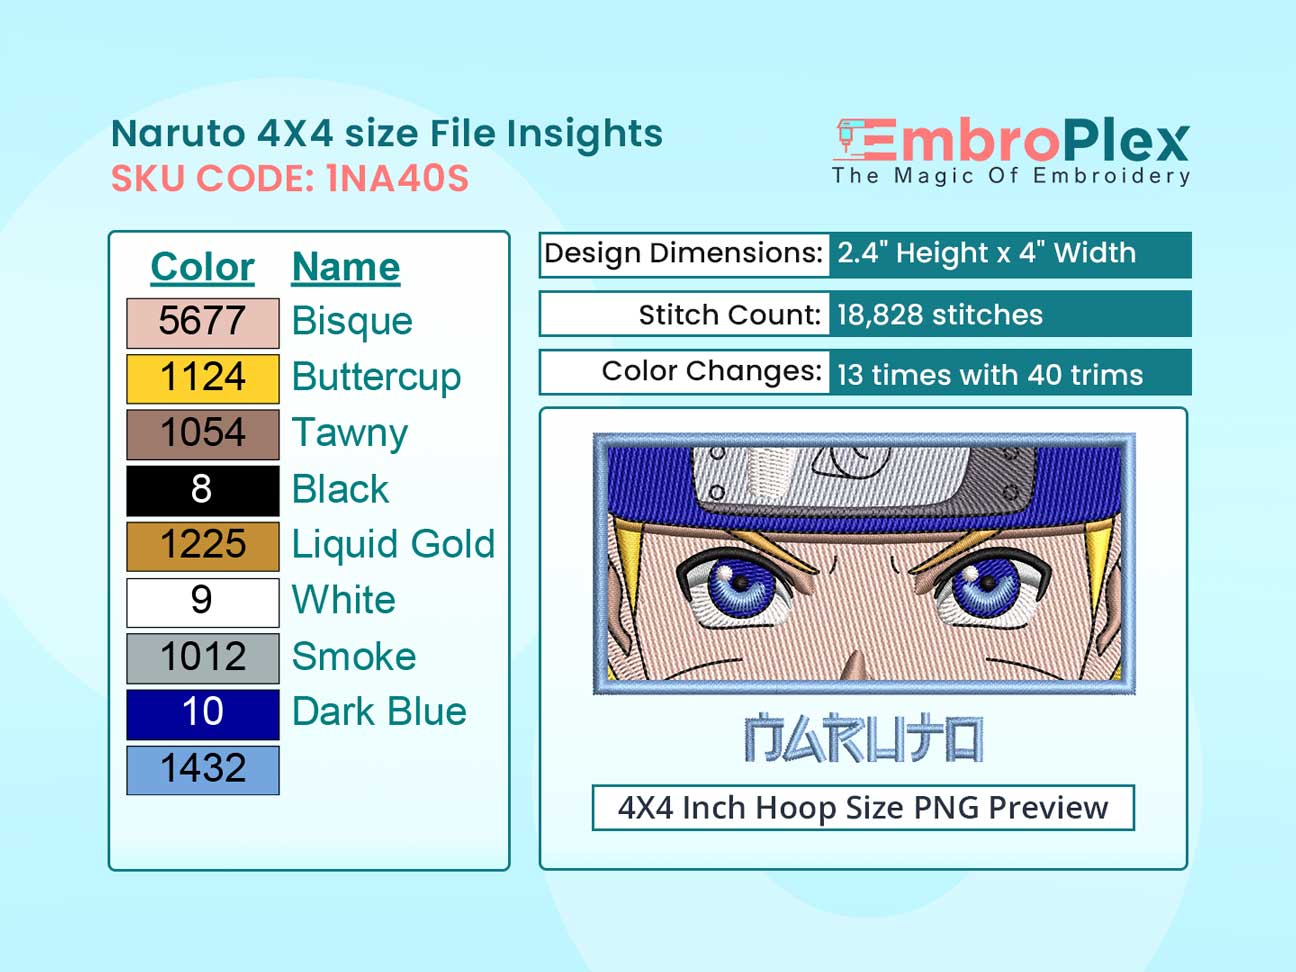 Anime-Inspired Naruto Embroidery Design File - 4x4 Inch hoop Size Variation overview image